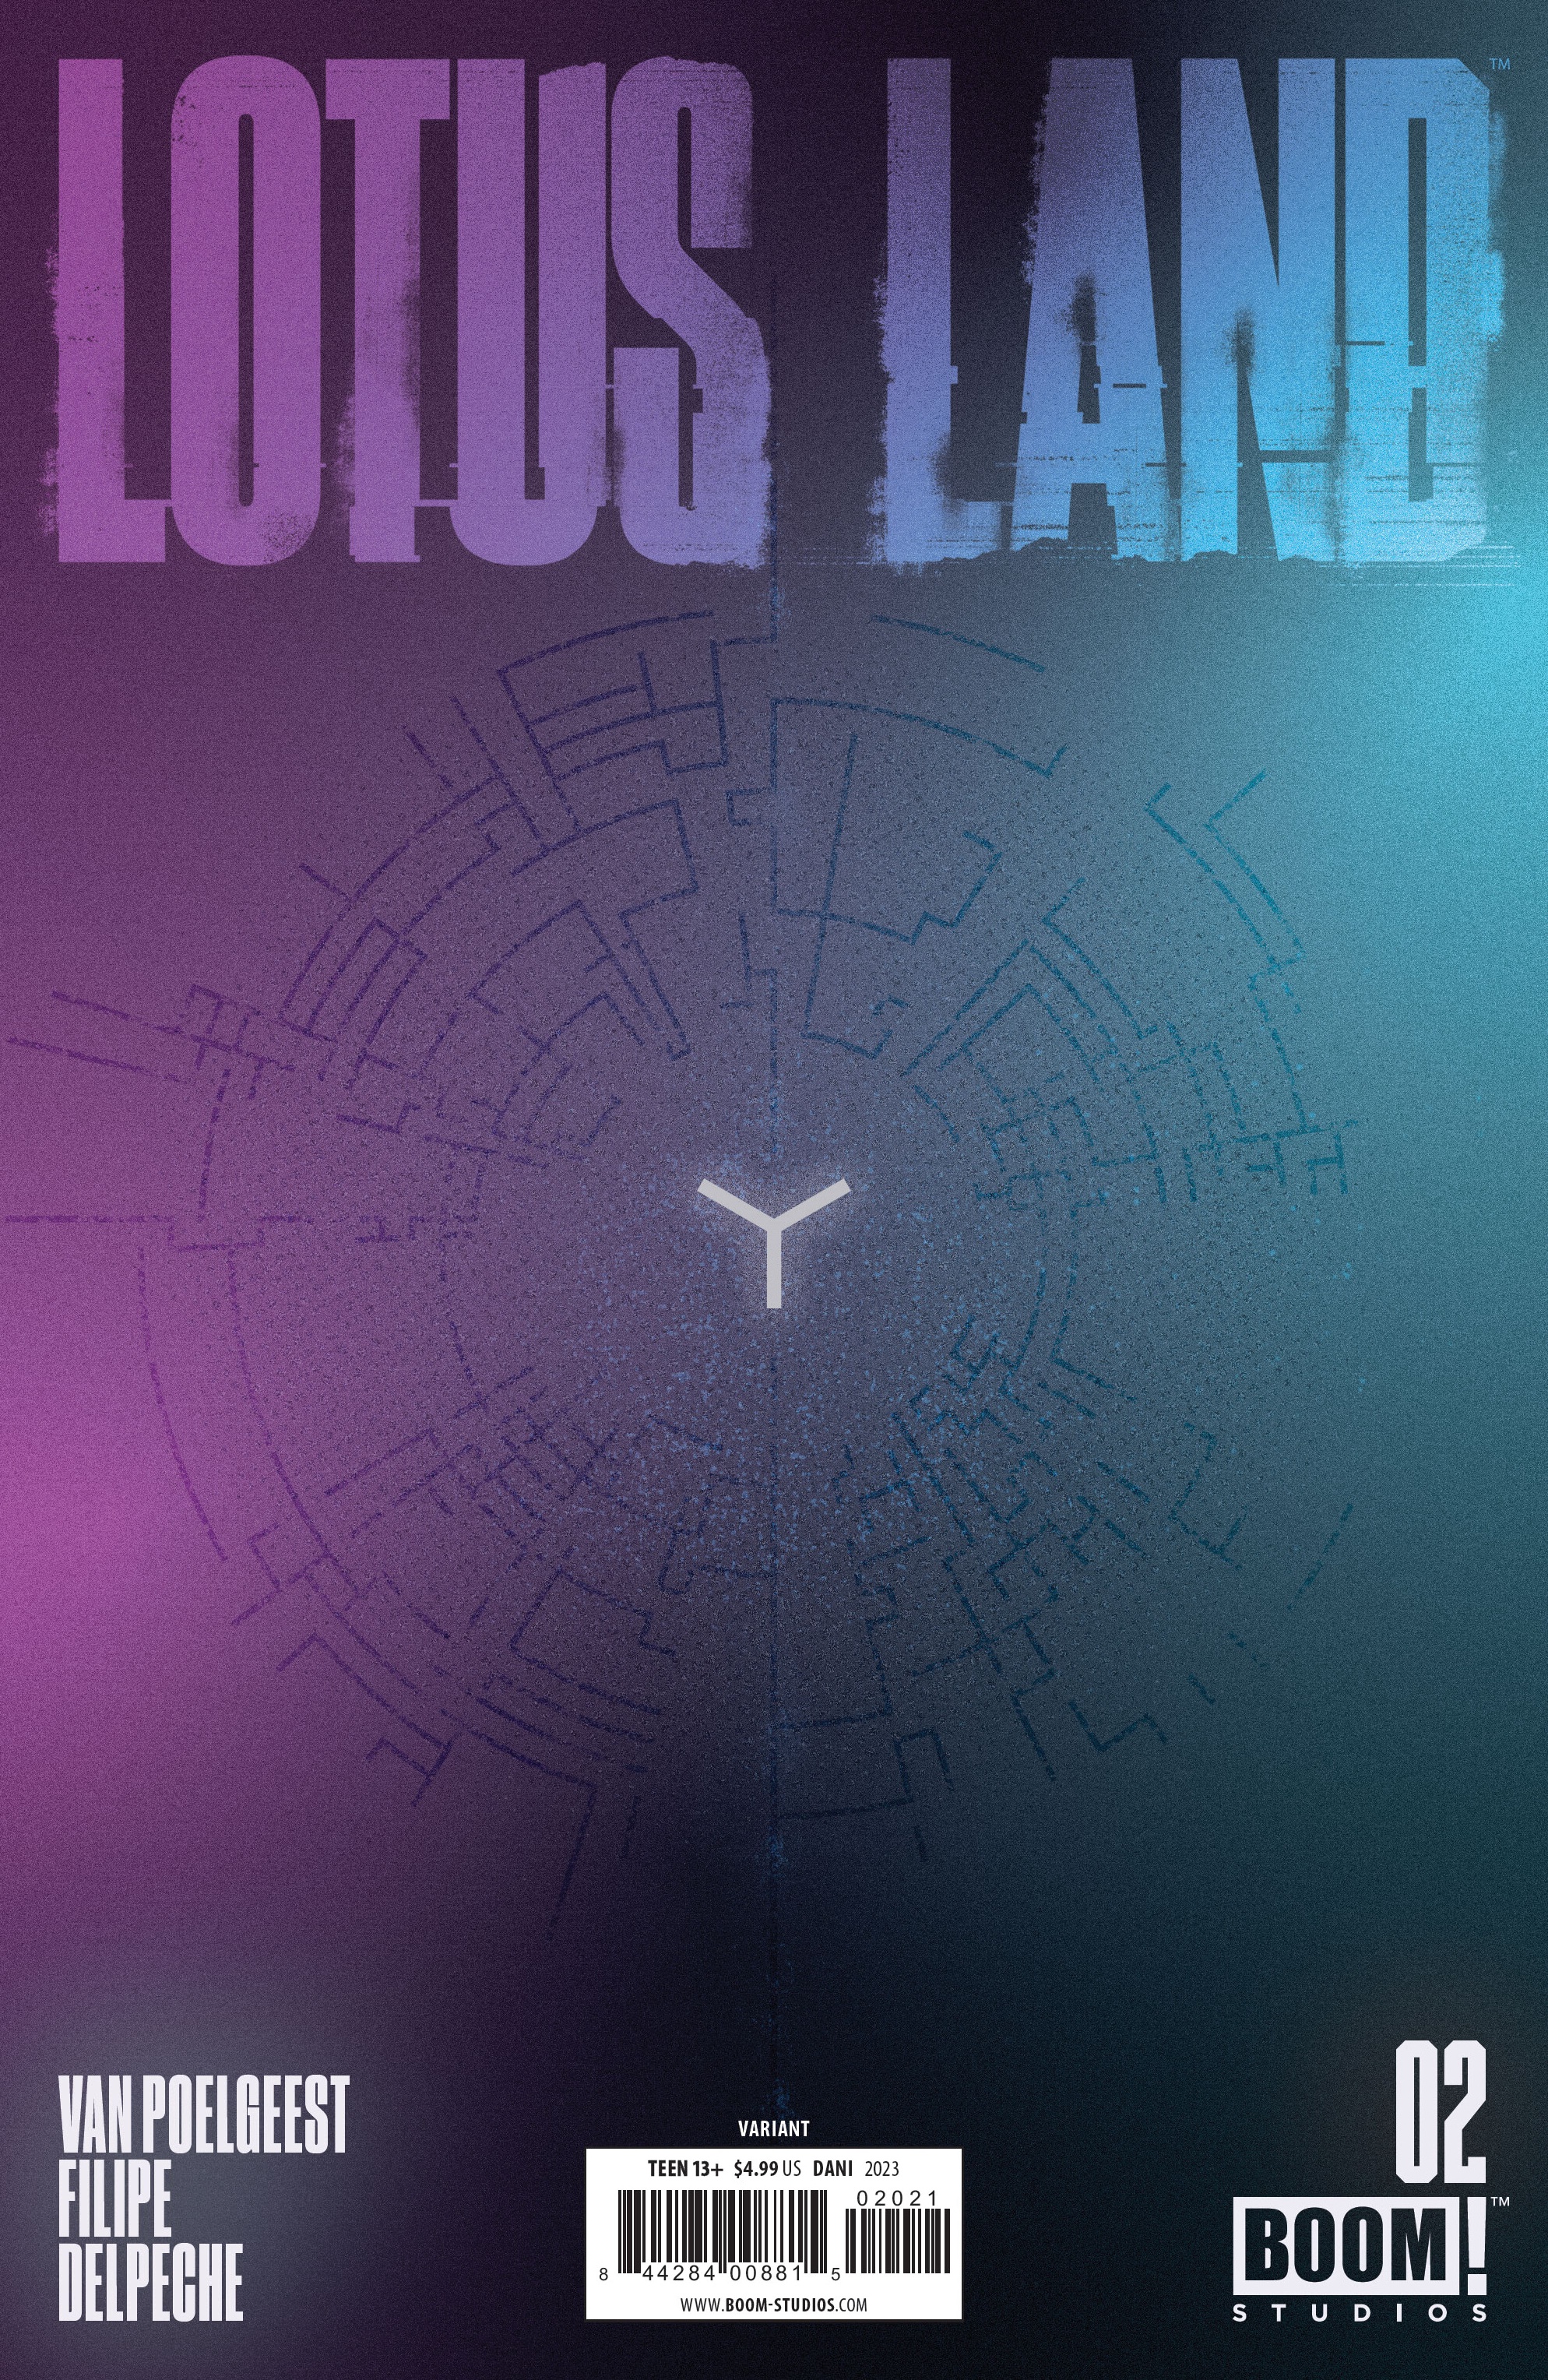 Read online Lotus Land comic -  Issue #2 - 35